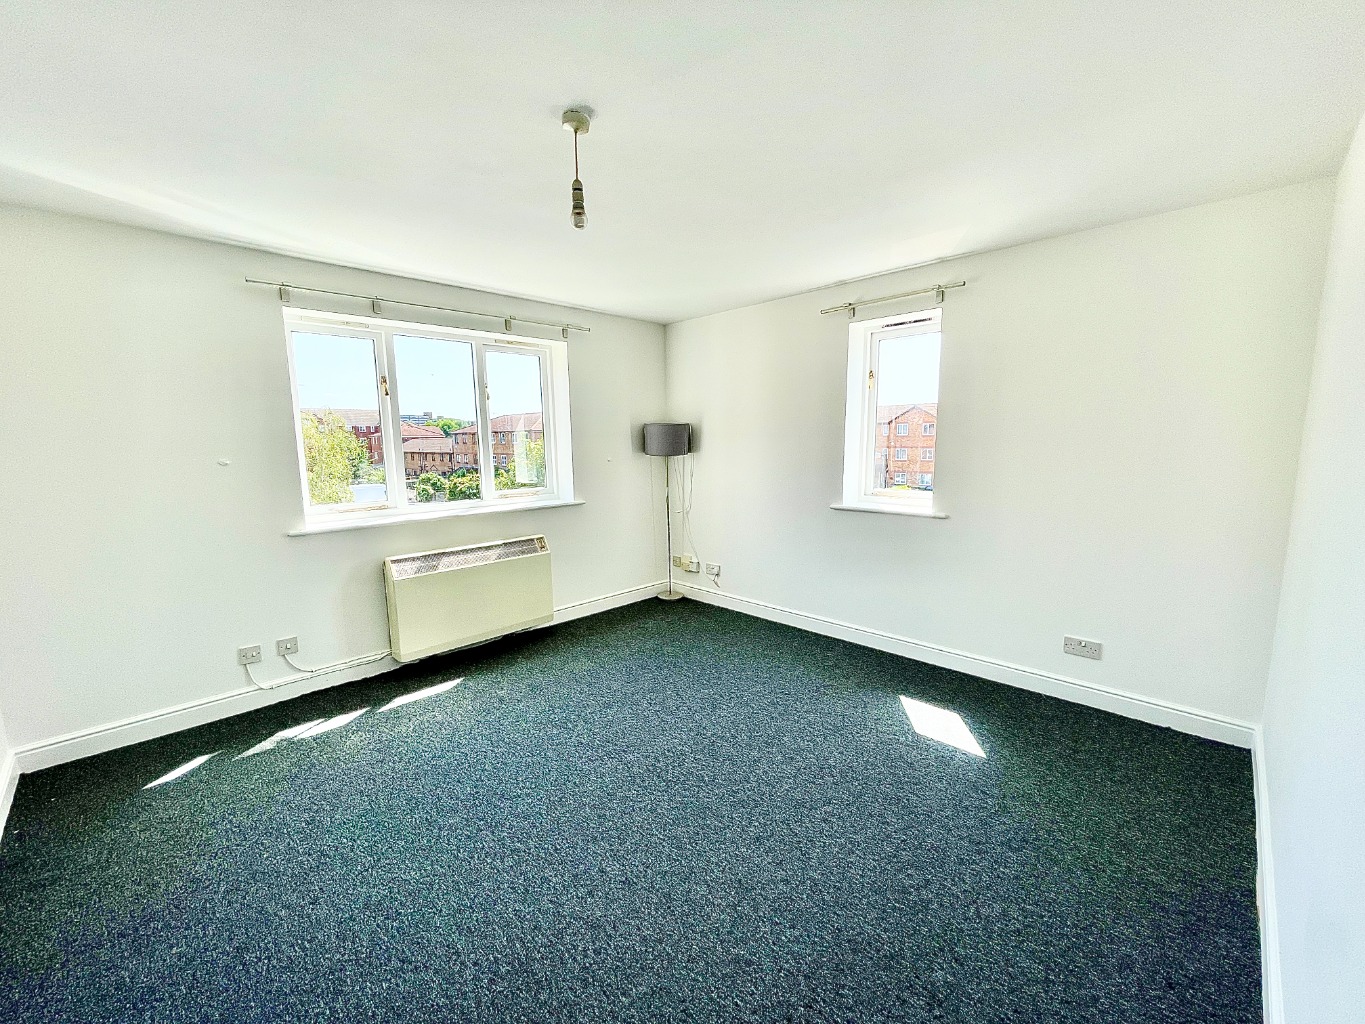 Offered with immediate availability, Beaumont Gibbs are delighted to offer this immaculate one bedroomed unfurnished second floor flat to let.